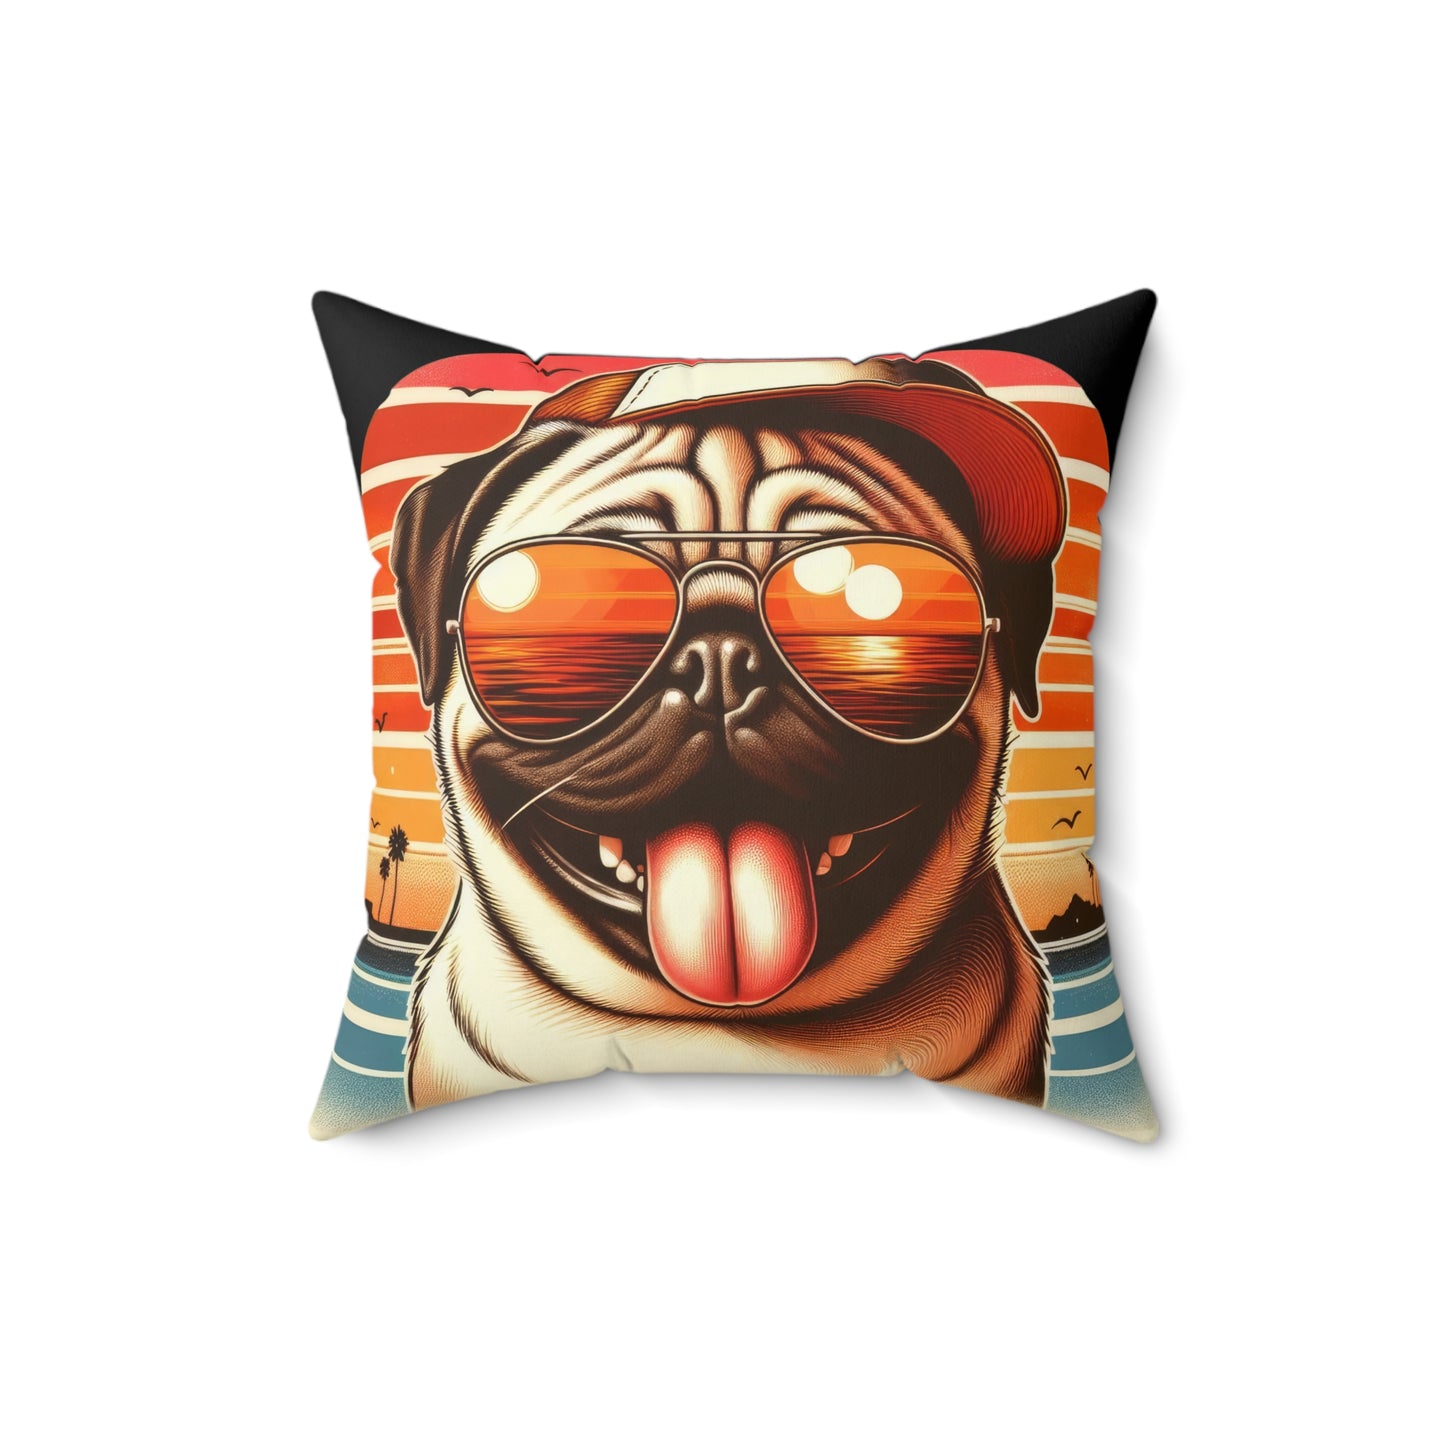 Pug Pet Polyester Square Throw Pillow